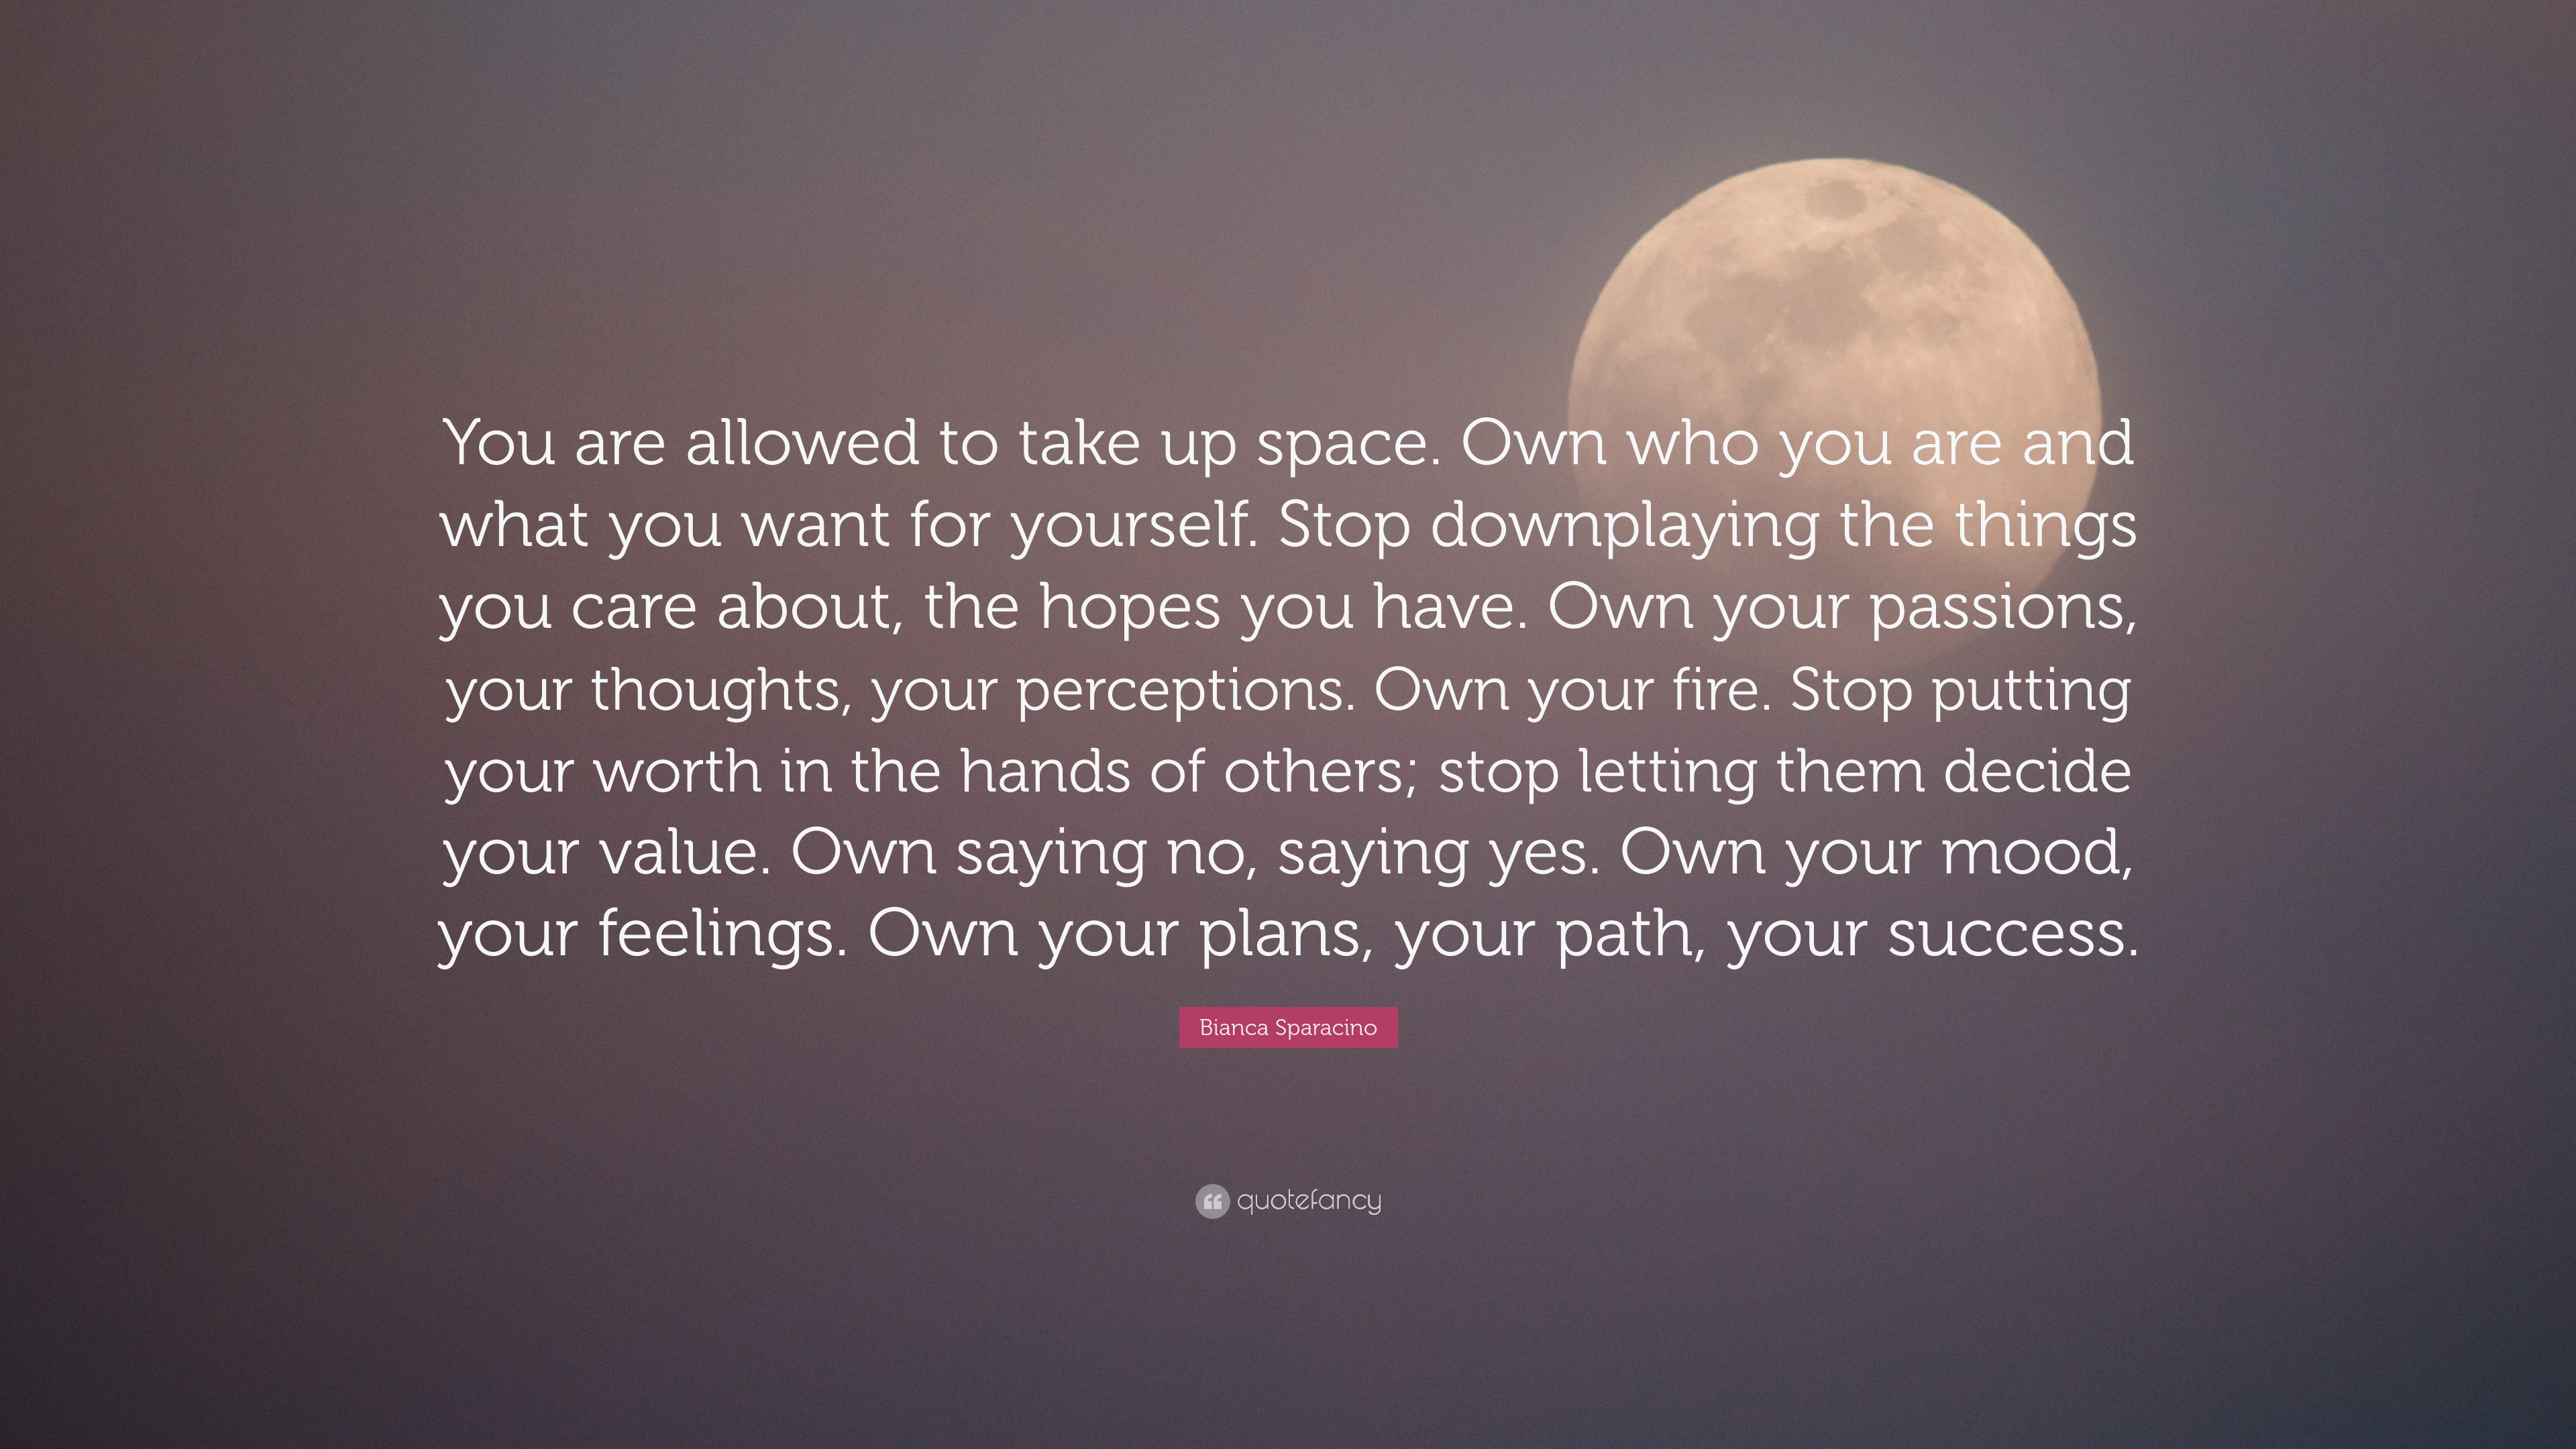 Bianca Sparacino Quote: “You are allowed to take up space. Own who you ...